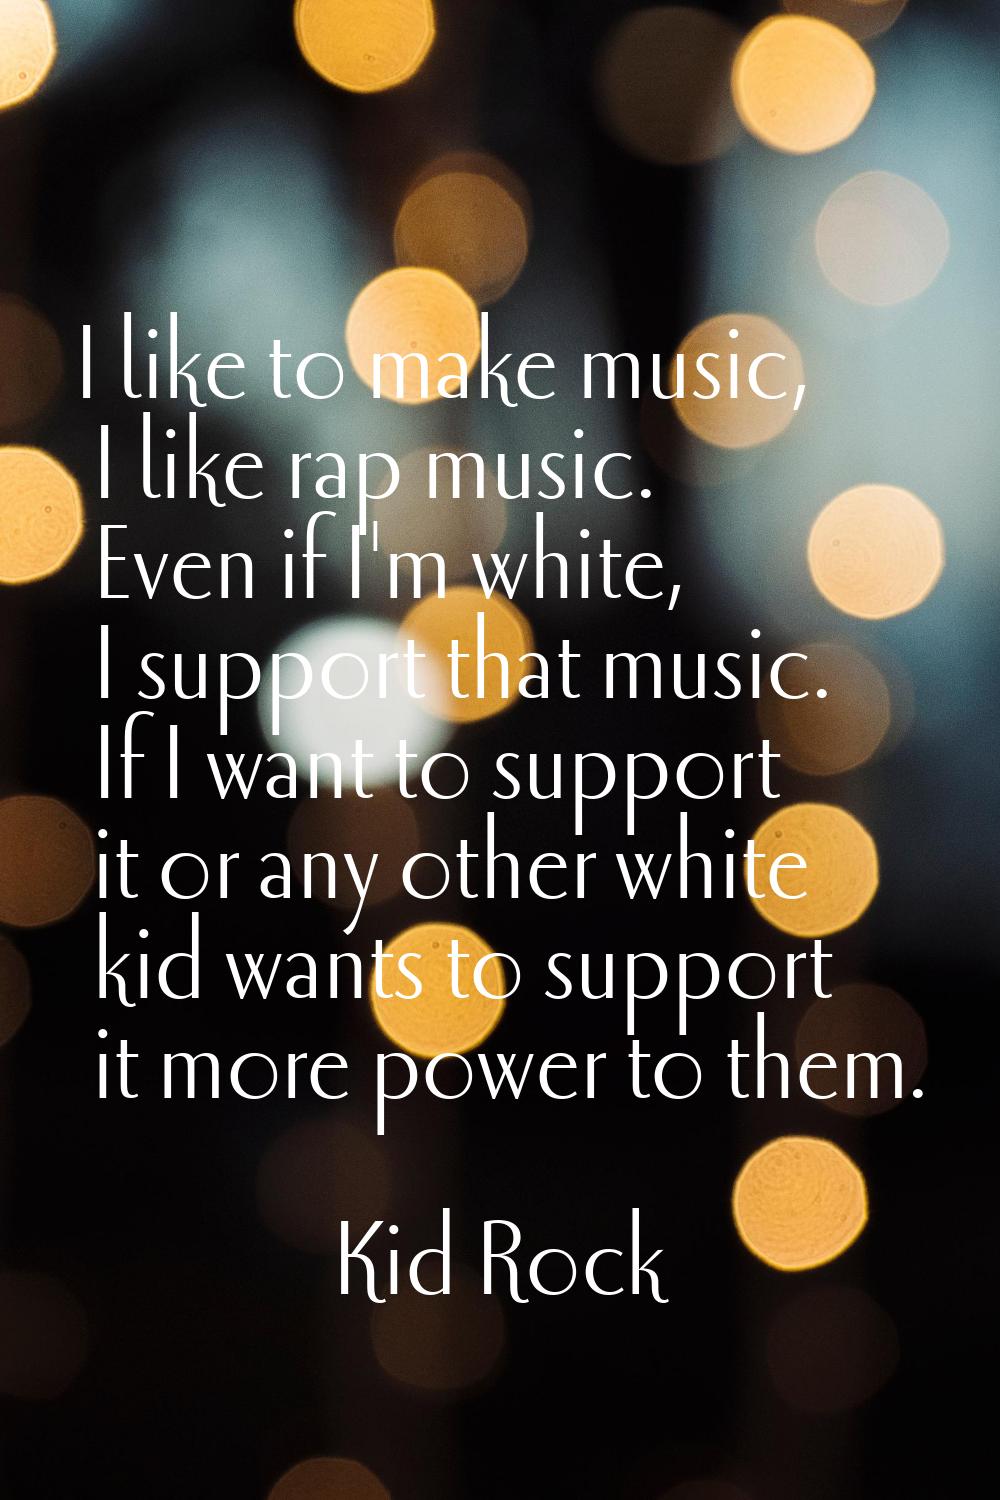 I like to make music, I like rap music. Even if I'm white, I support that music. If I want to suppo